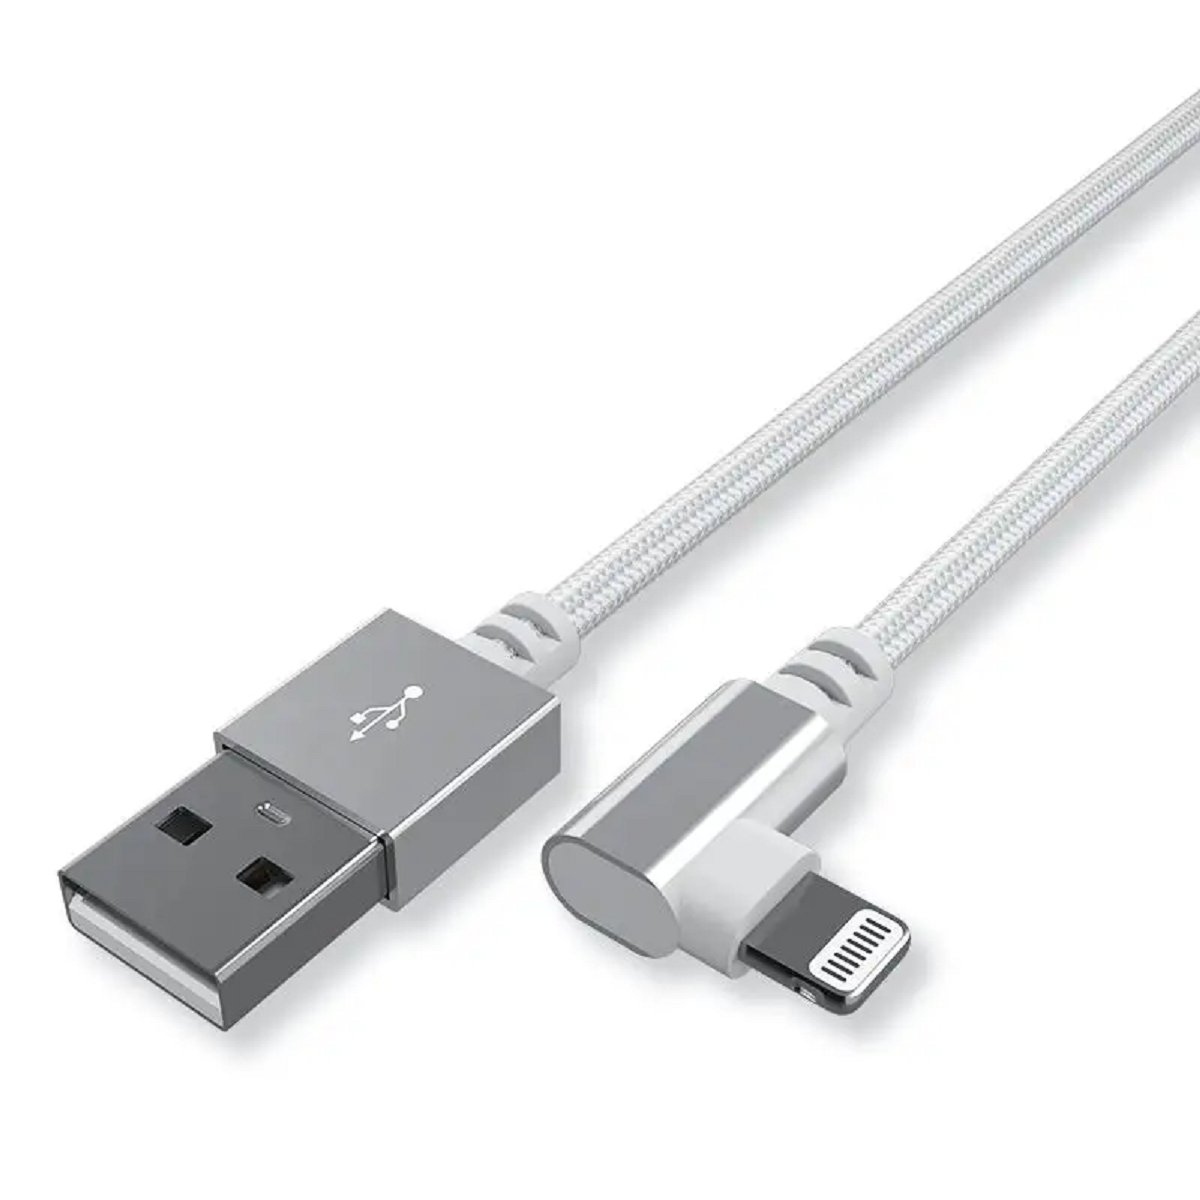 50 USB A to Lightning Cable